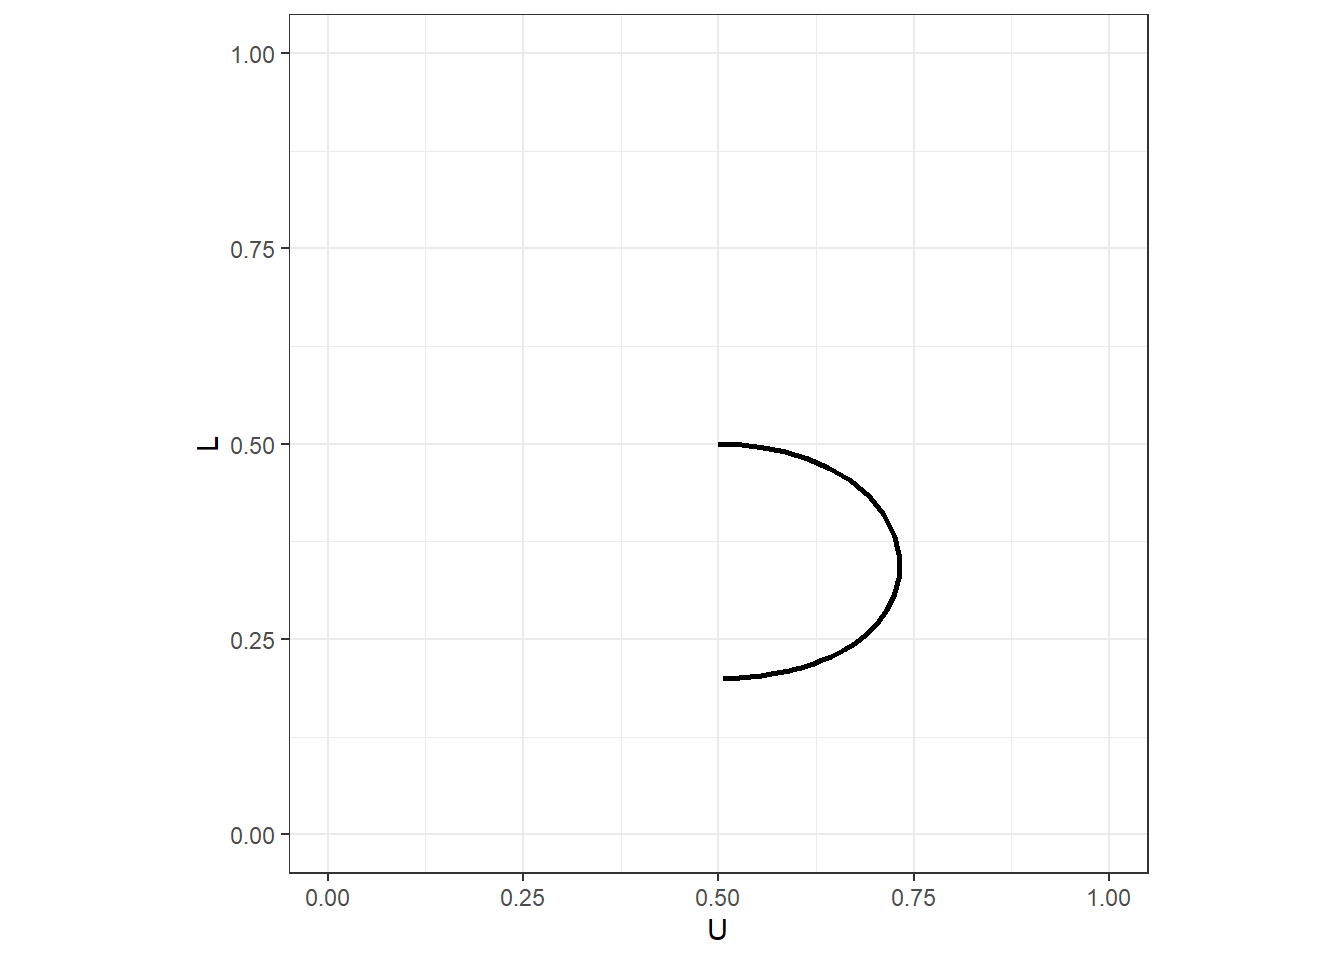 Locus of logit quantal response equilibrium probabilities for a generalized matching pennies game.